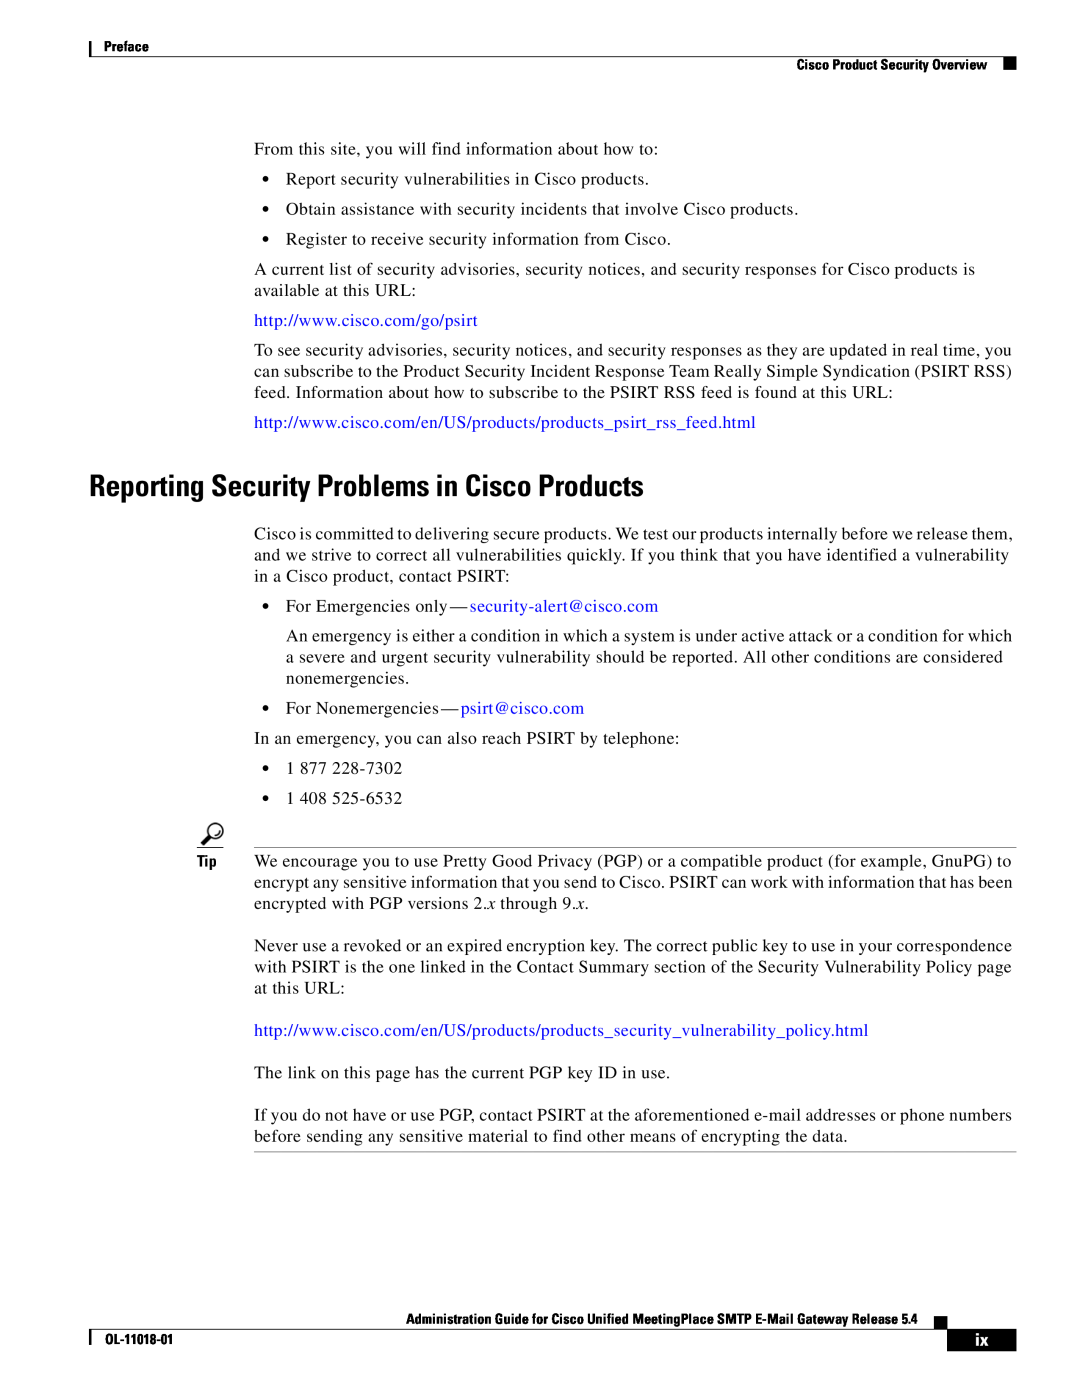 Cisco Systems SMTP manual Reporting Security Problems in Cisco Products, For Emergencies only - security-alert@cisco.com 